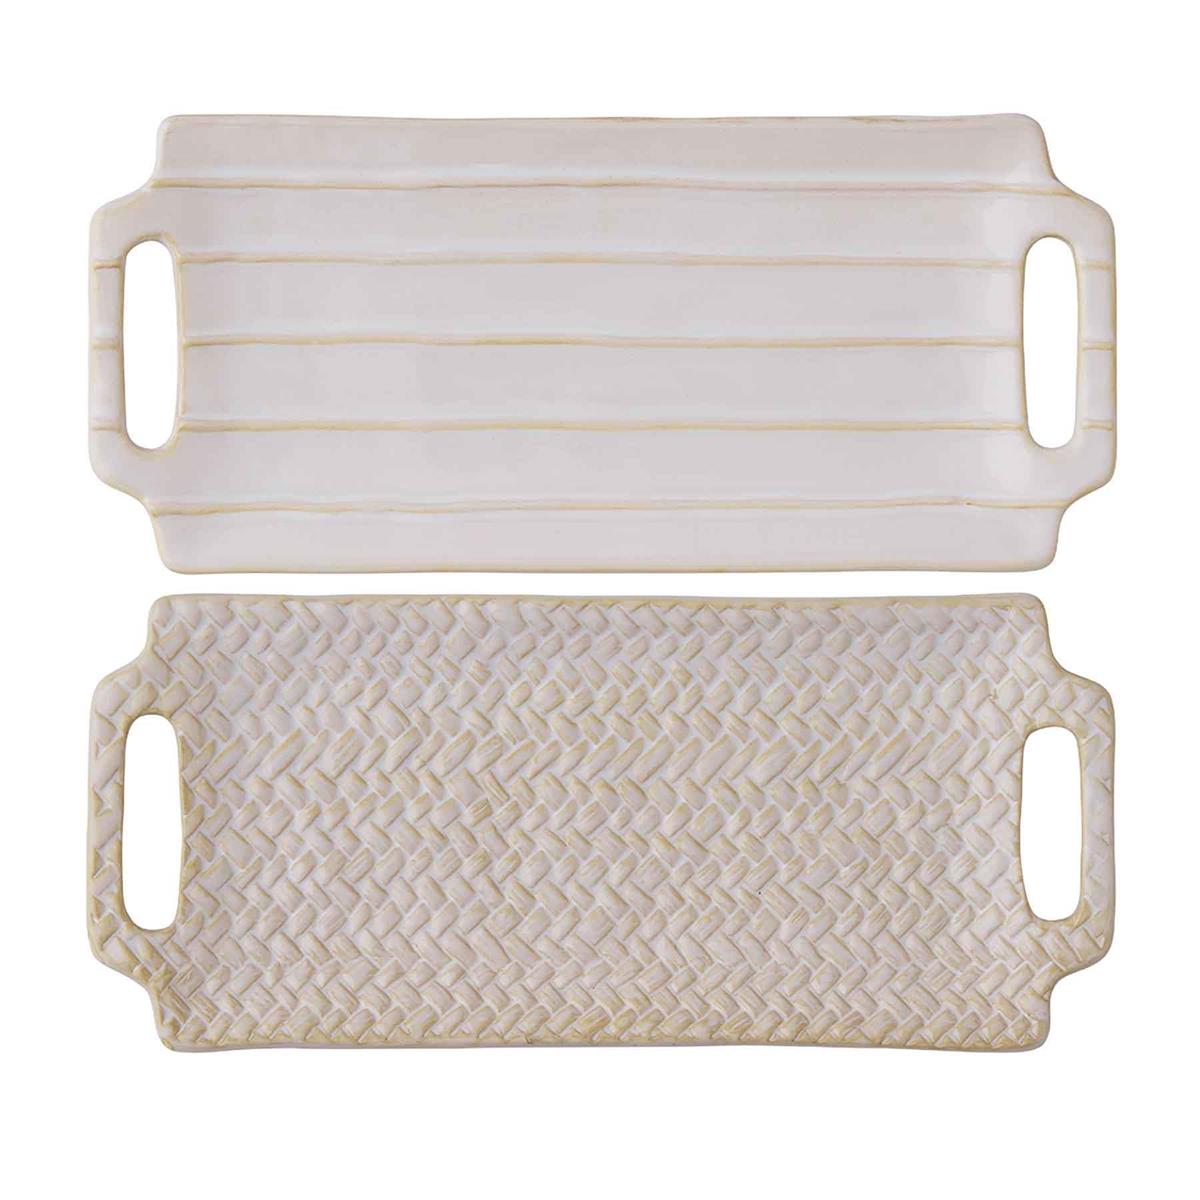 both styles of textured stoneware trays on a white background